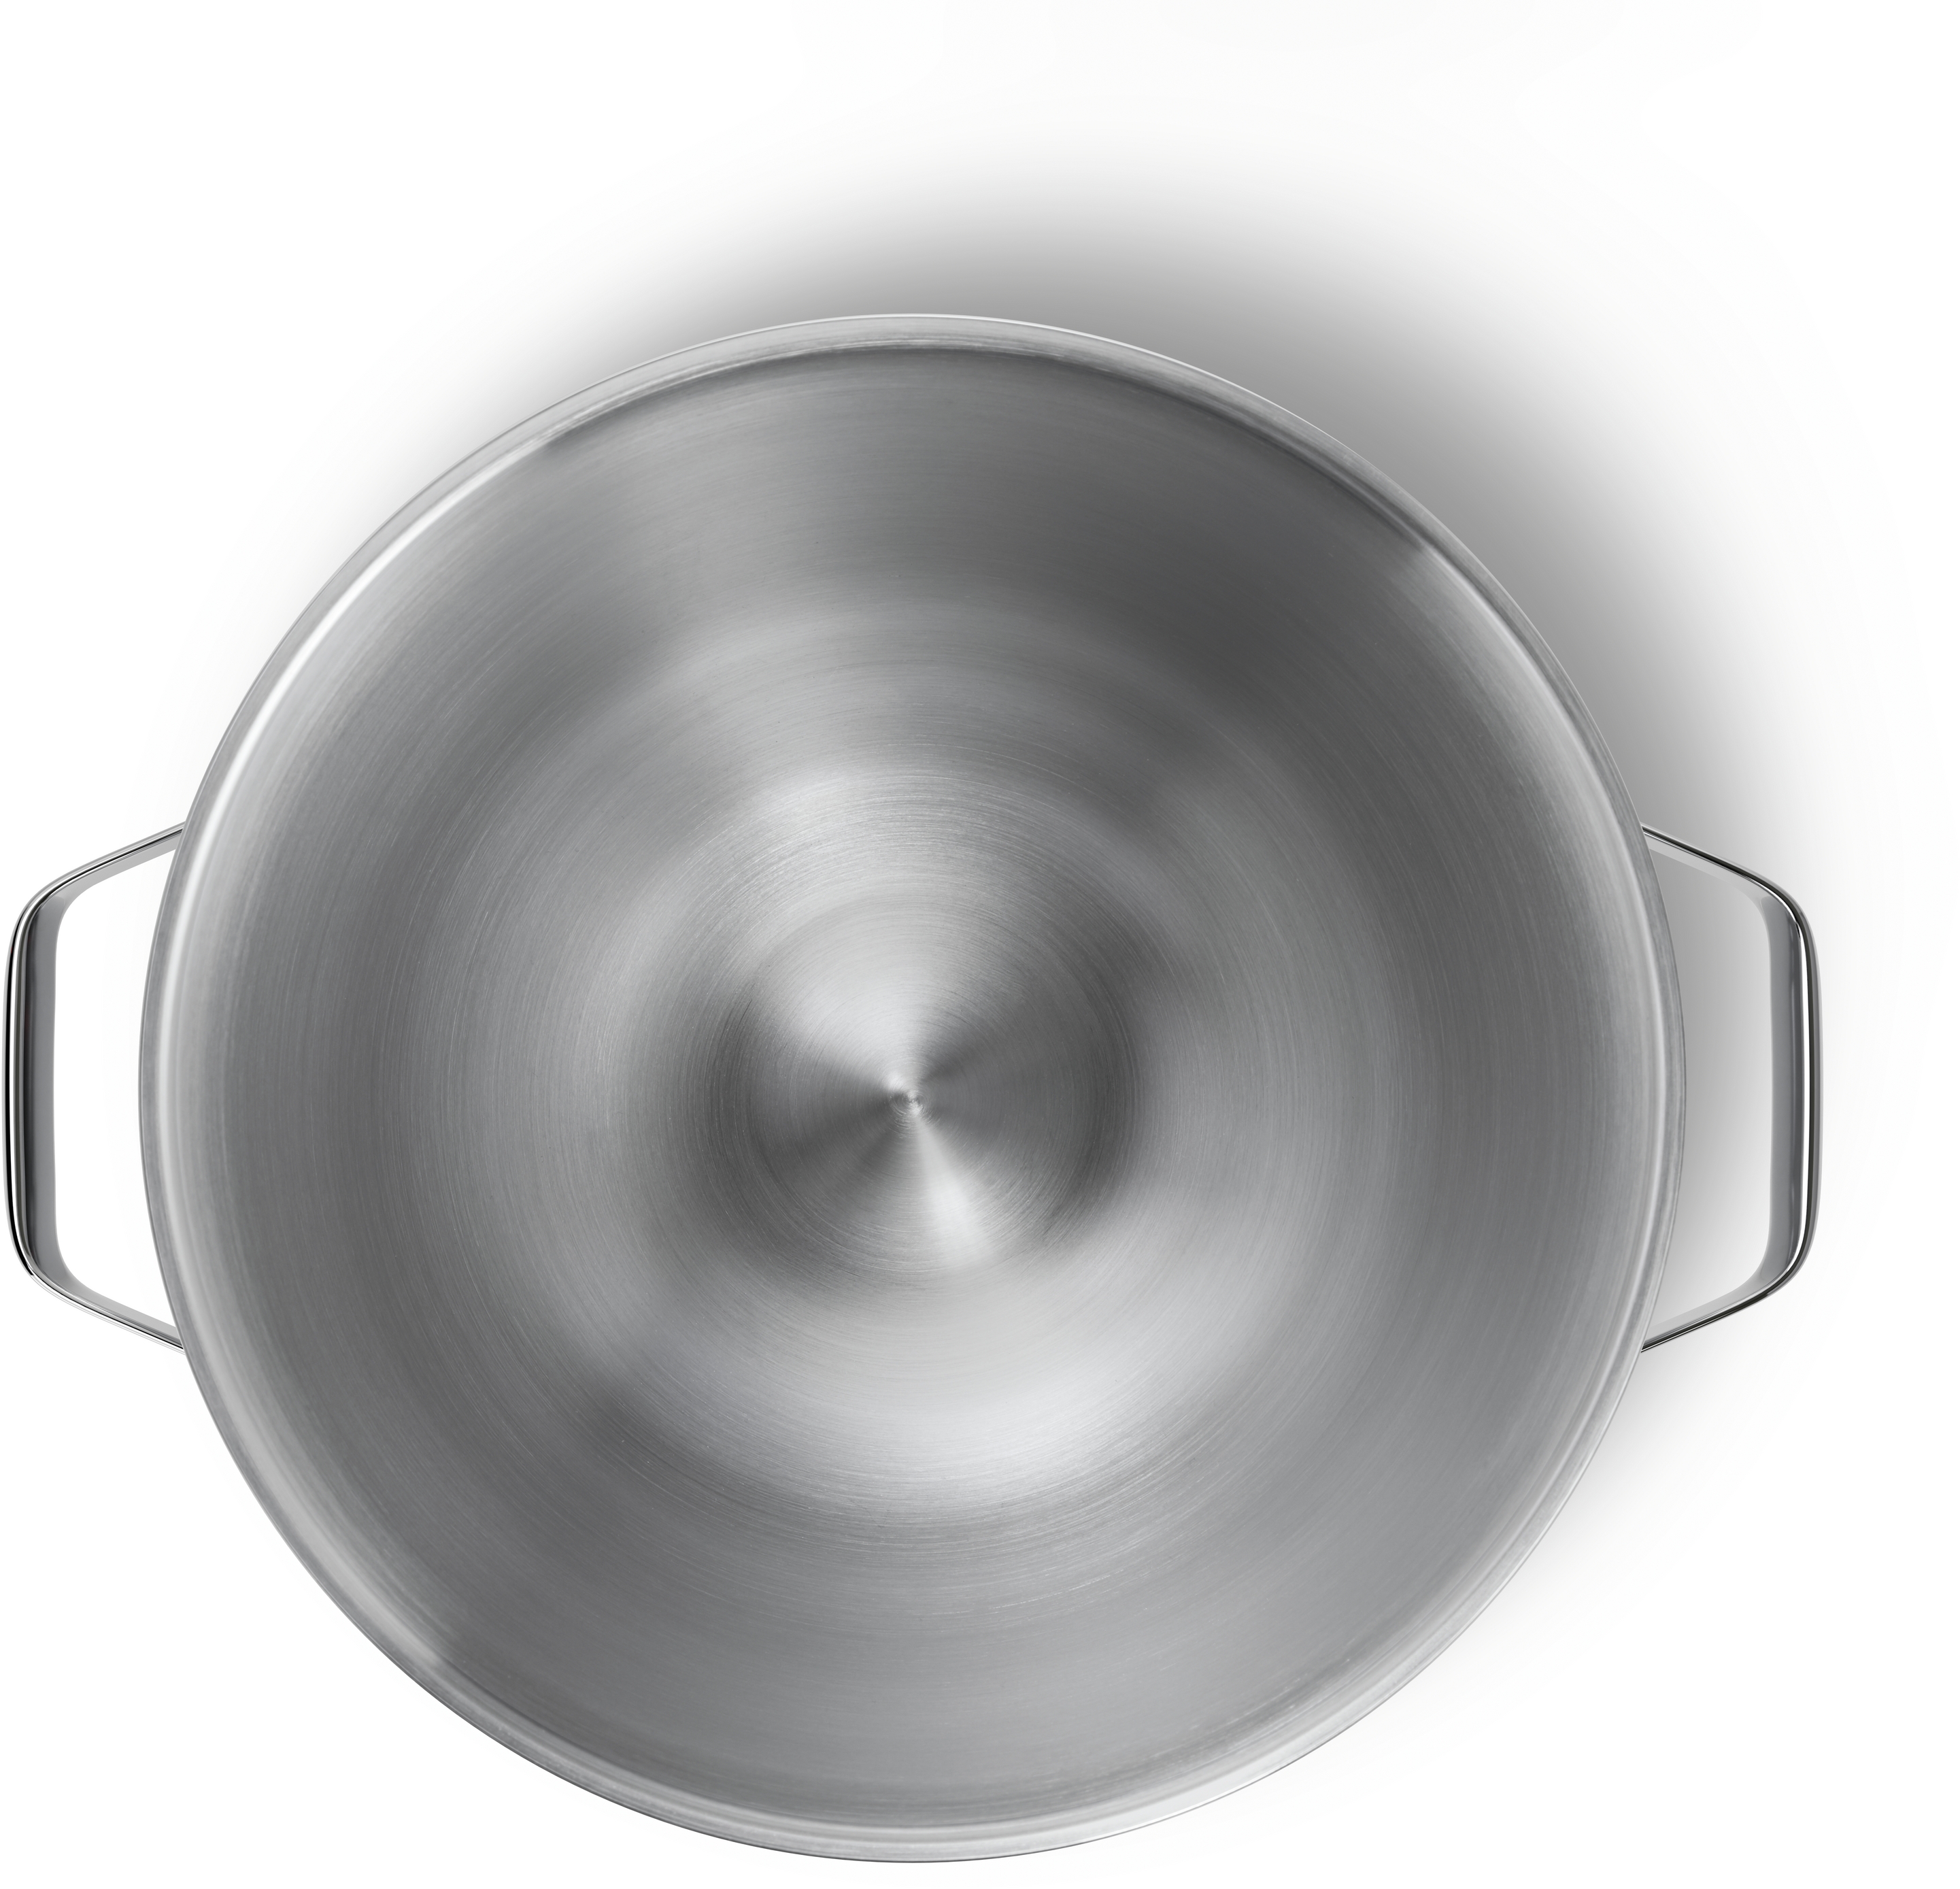 Stainless steel mixing bowl, MUZS6ER